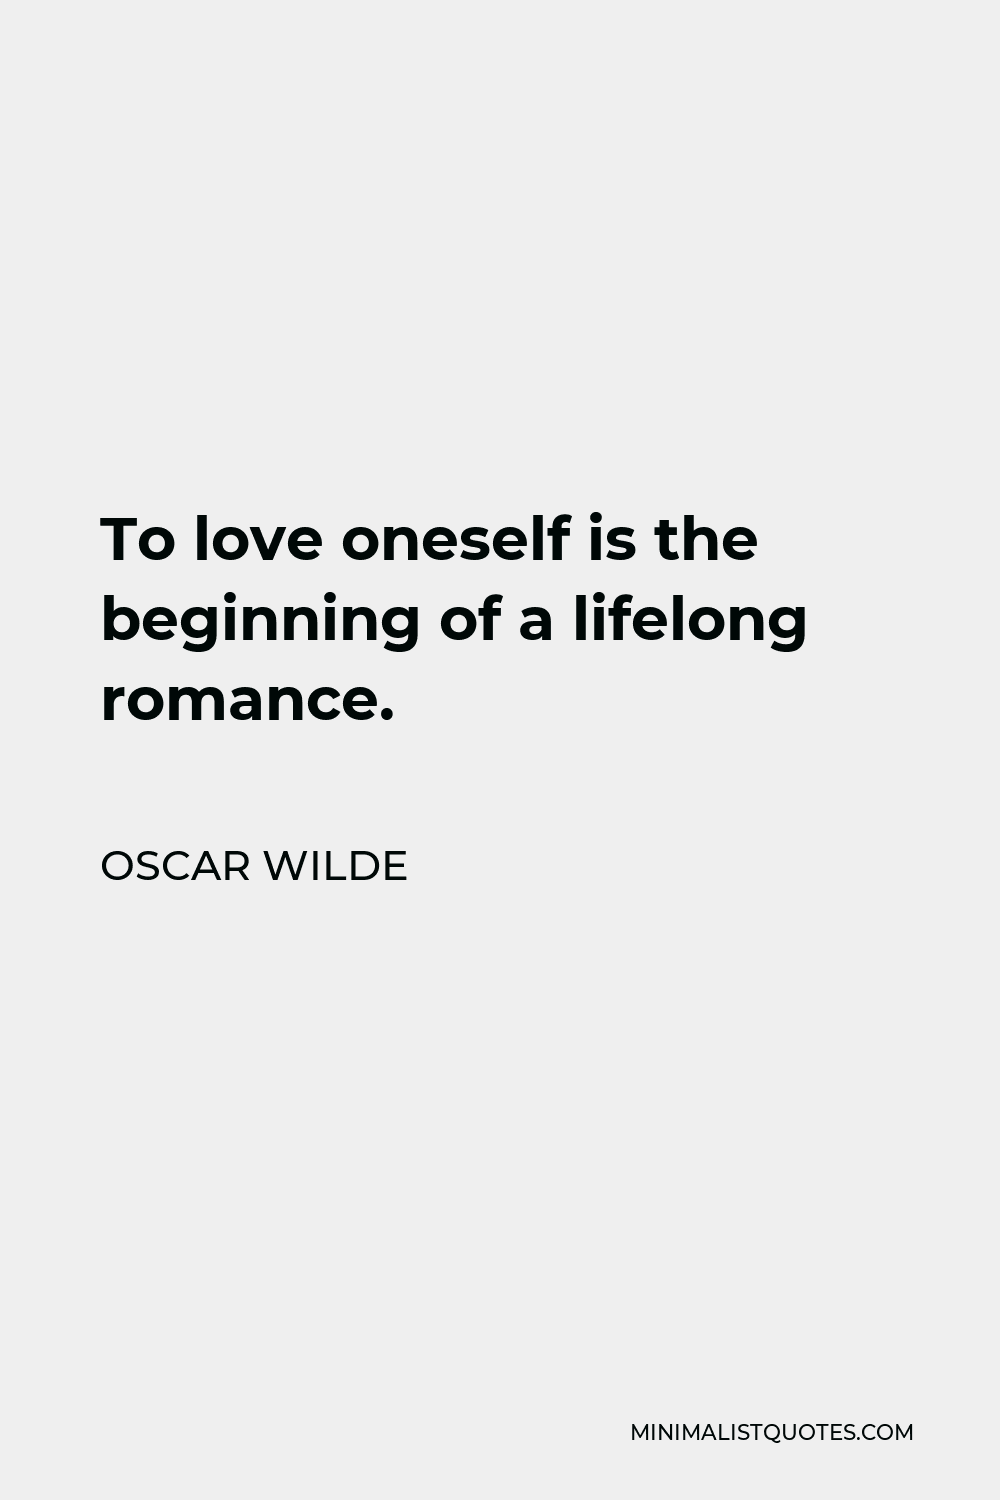 Oscar Wilde Quote: To love oneself is the beginning of a lifelong romance.